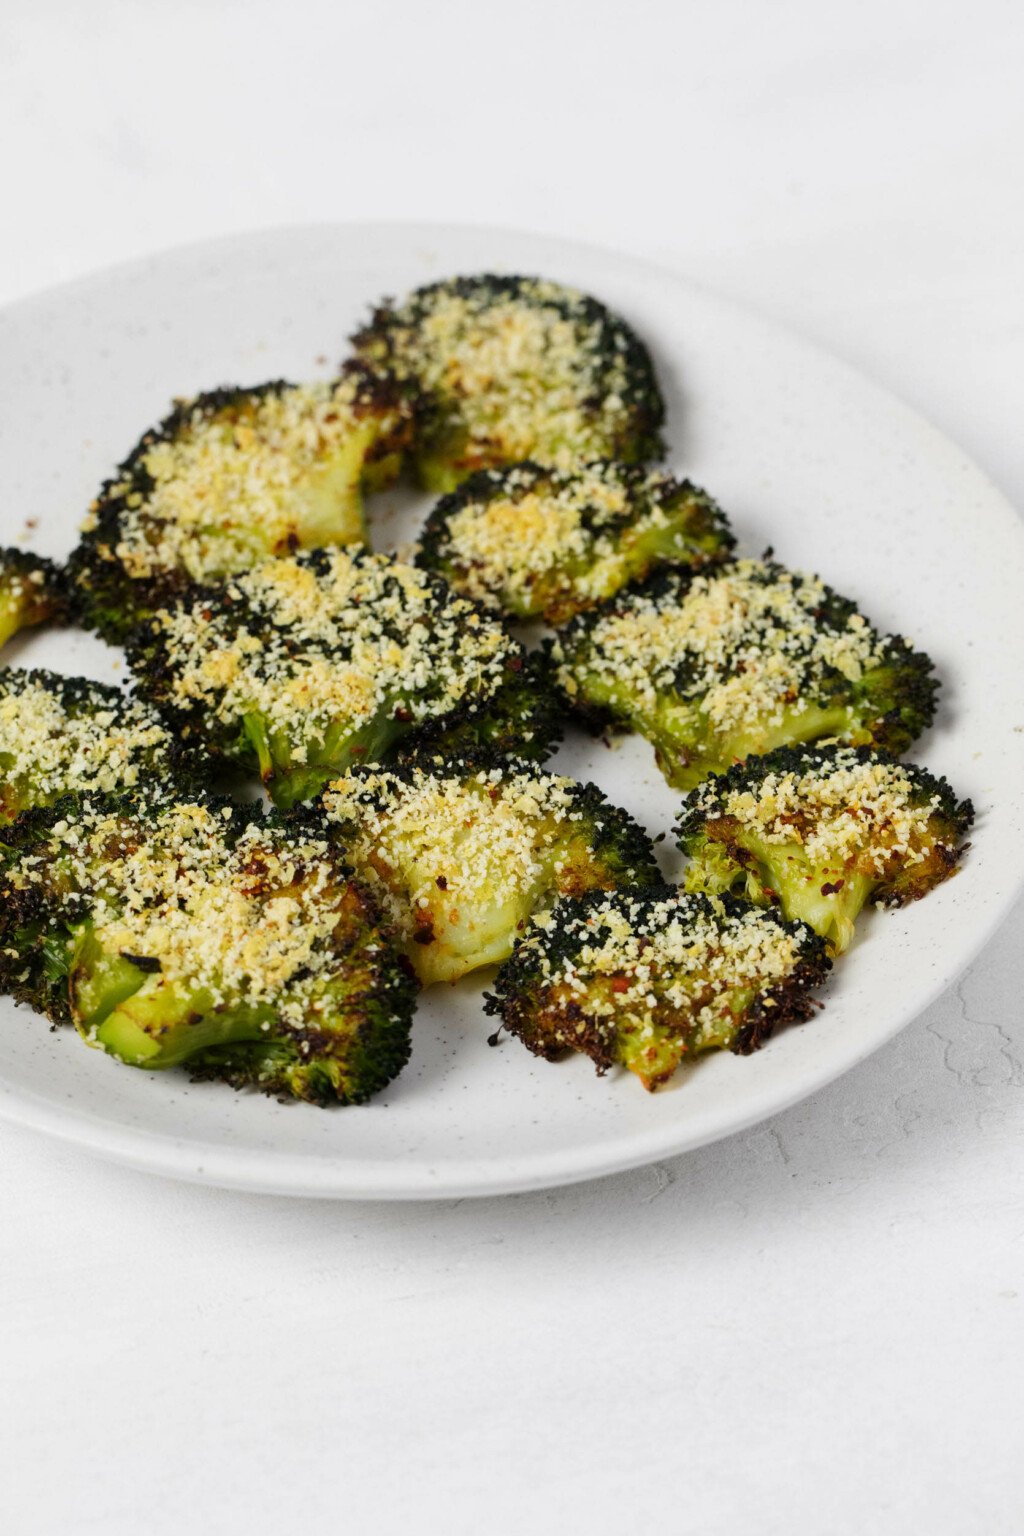 An overhead image of smashed broccoli florets that have been topped with a nut-based vegan "cheese" topping.